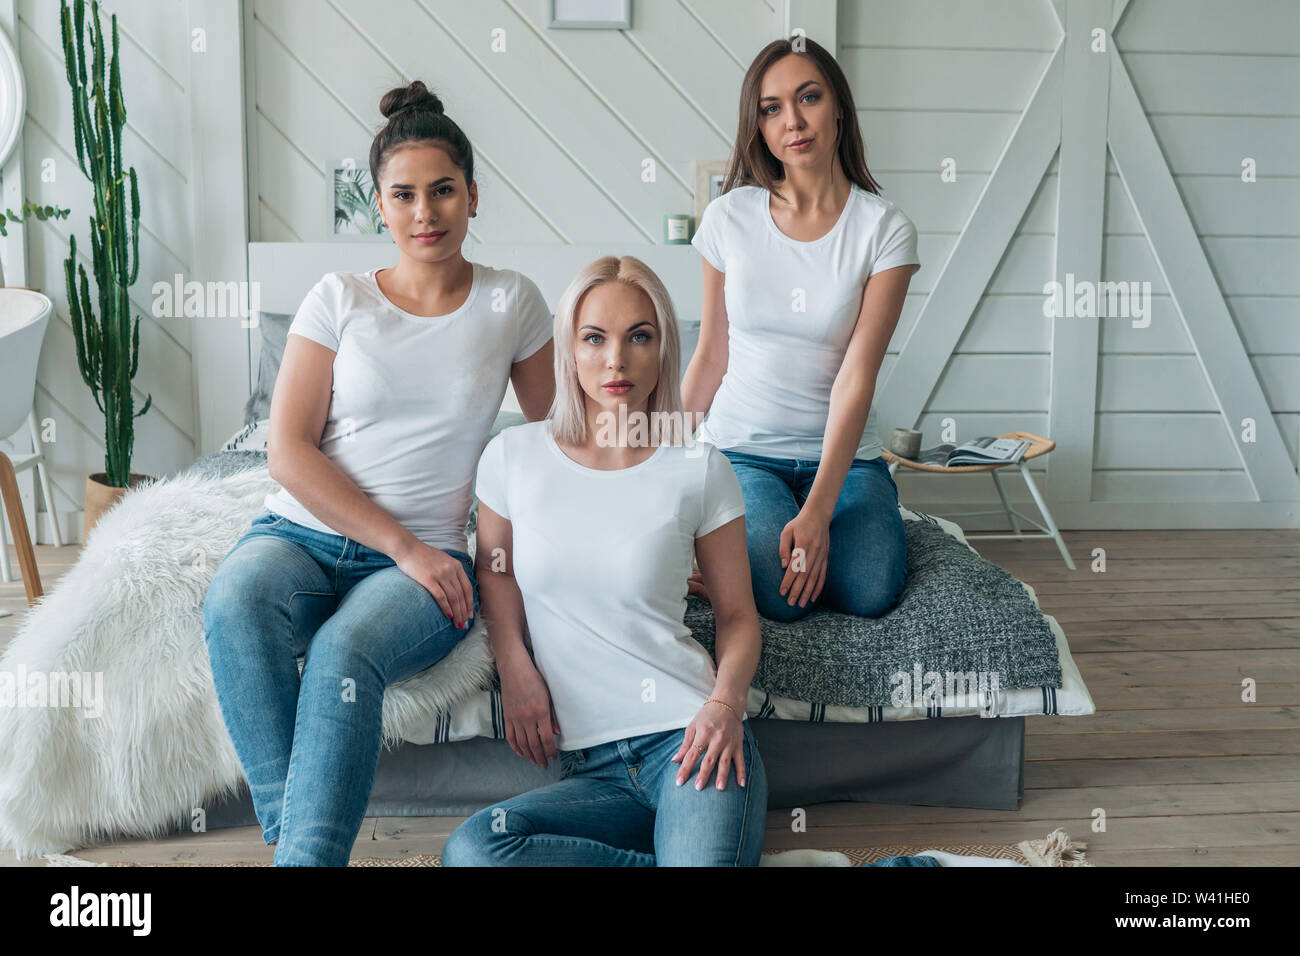 Beautiful girls model of Caucasian appearance. Layout for design on white t-shirts. Stock Photo